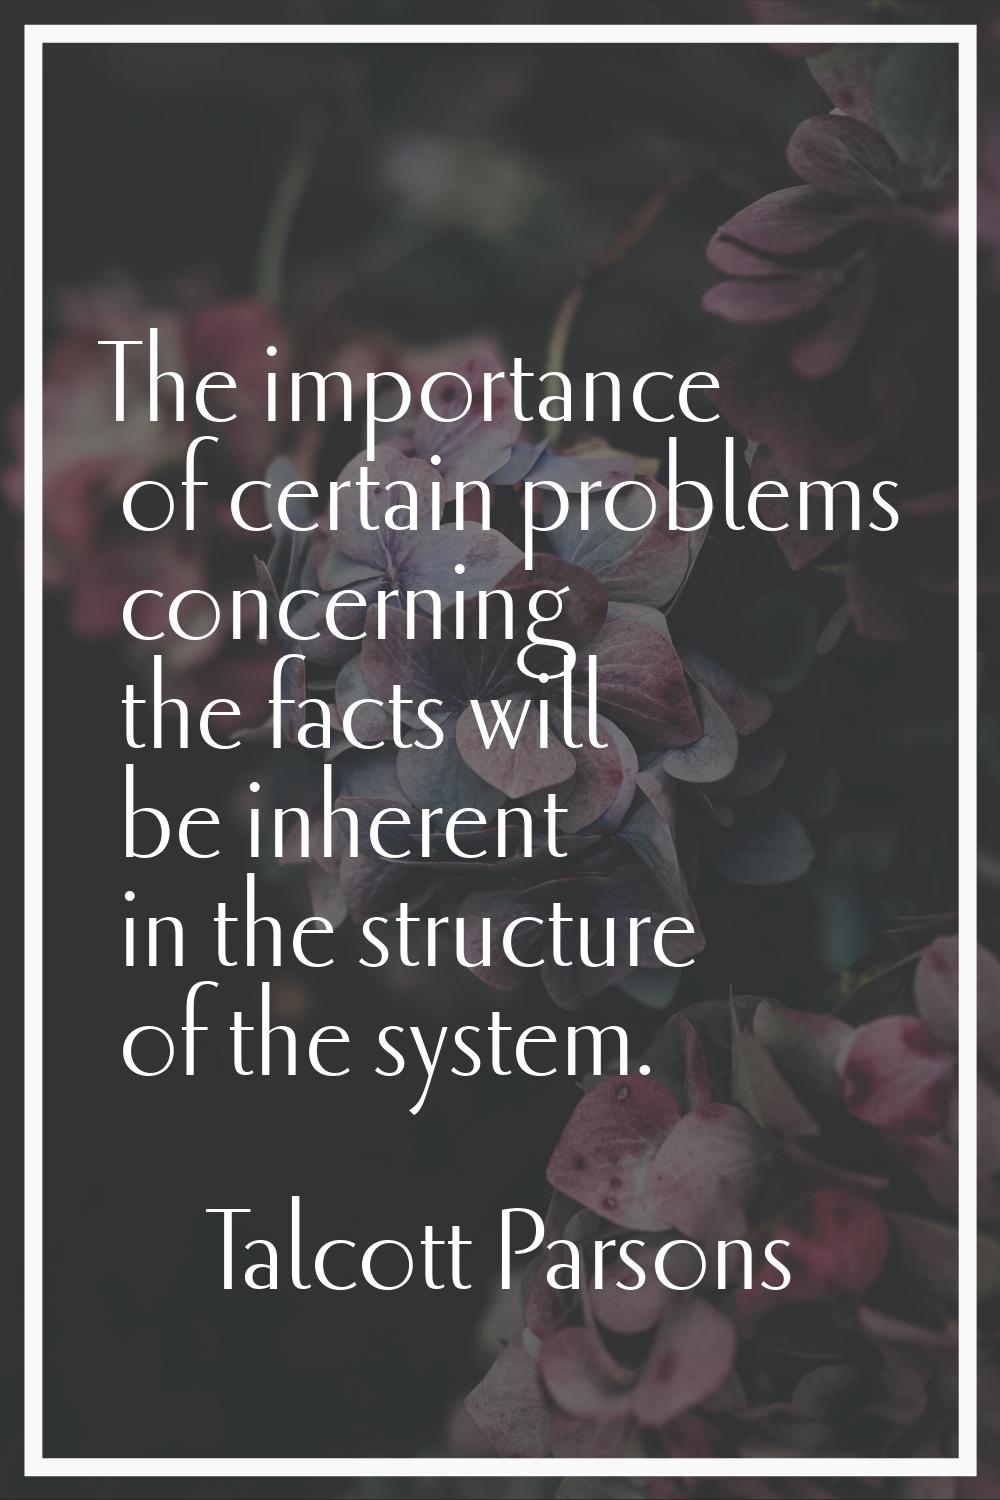 The importance of certain problems concerning the facts will be inherent in the structure of the sy